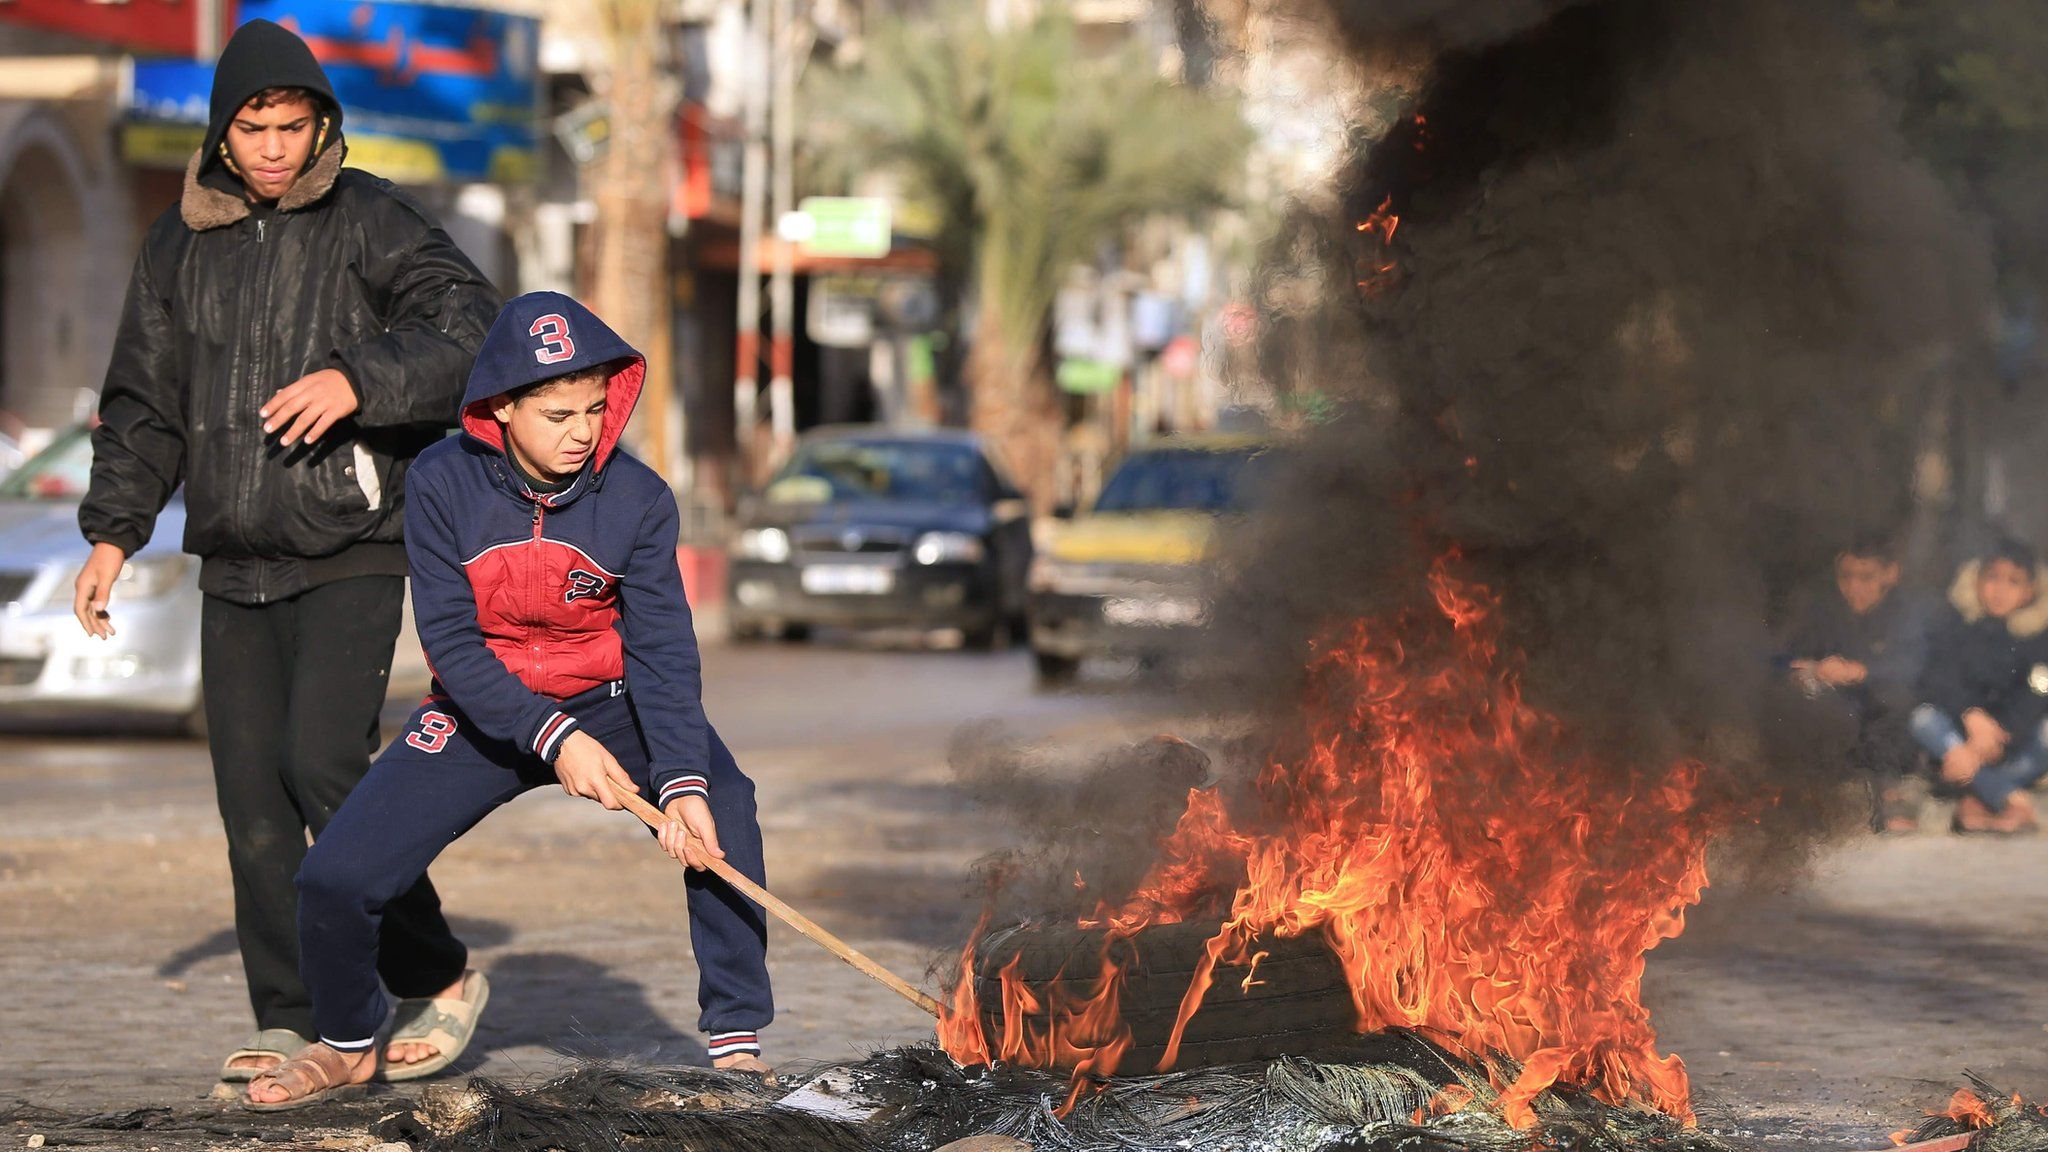 Palestinian youths set tyres on fire in Gaza City on 7 December 2017